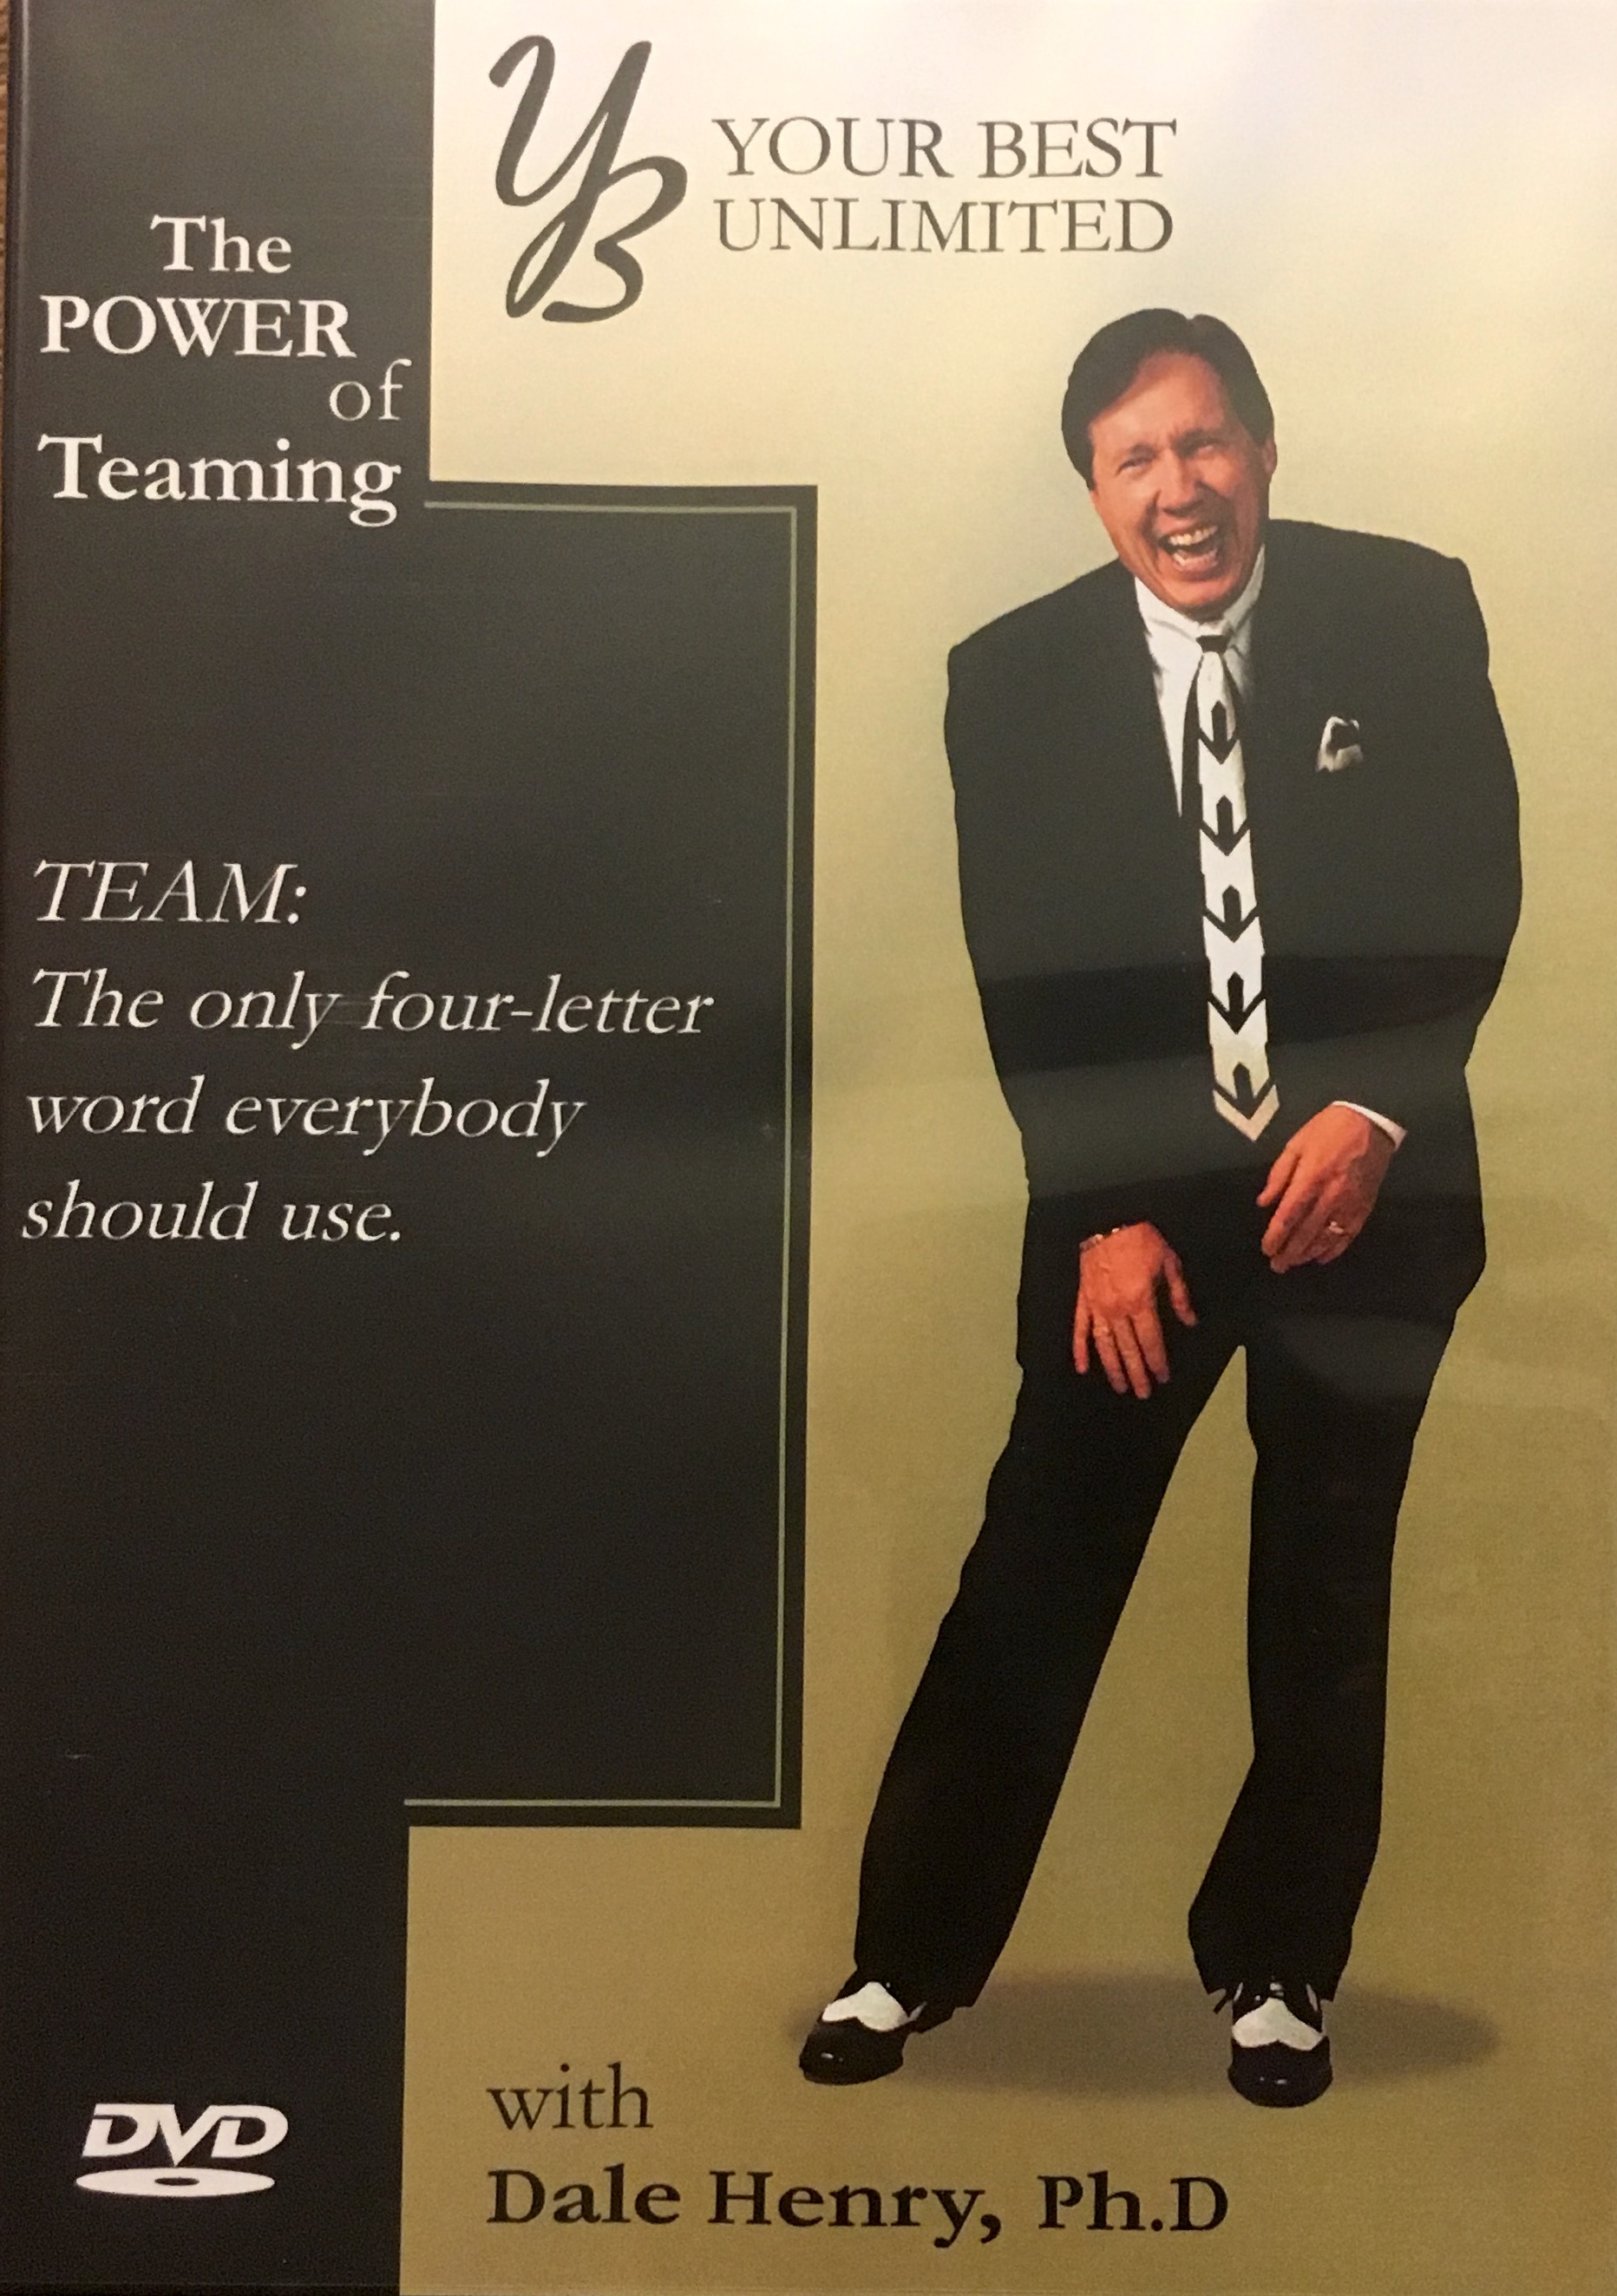 Dr. Dale The Power of Teaming DVD